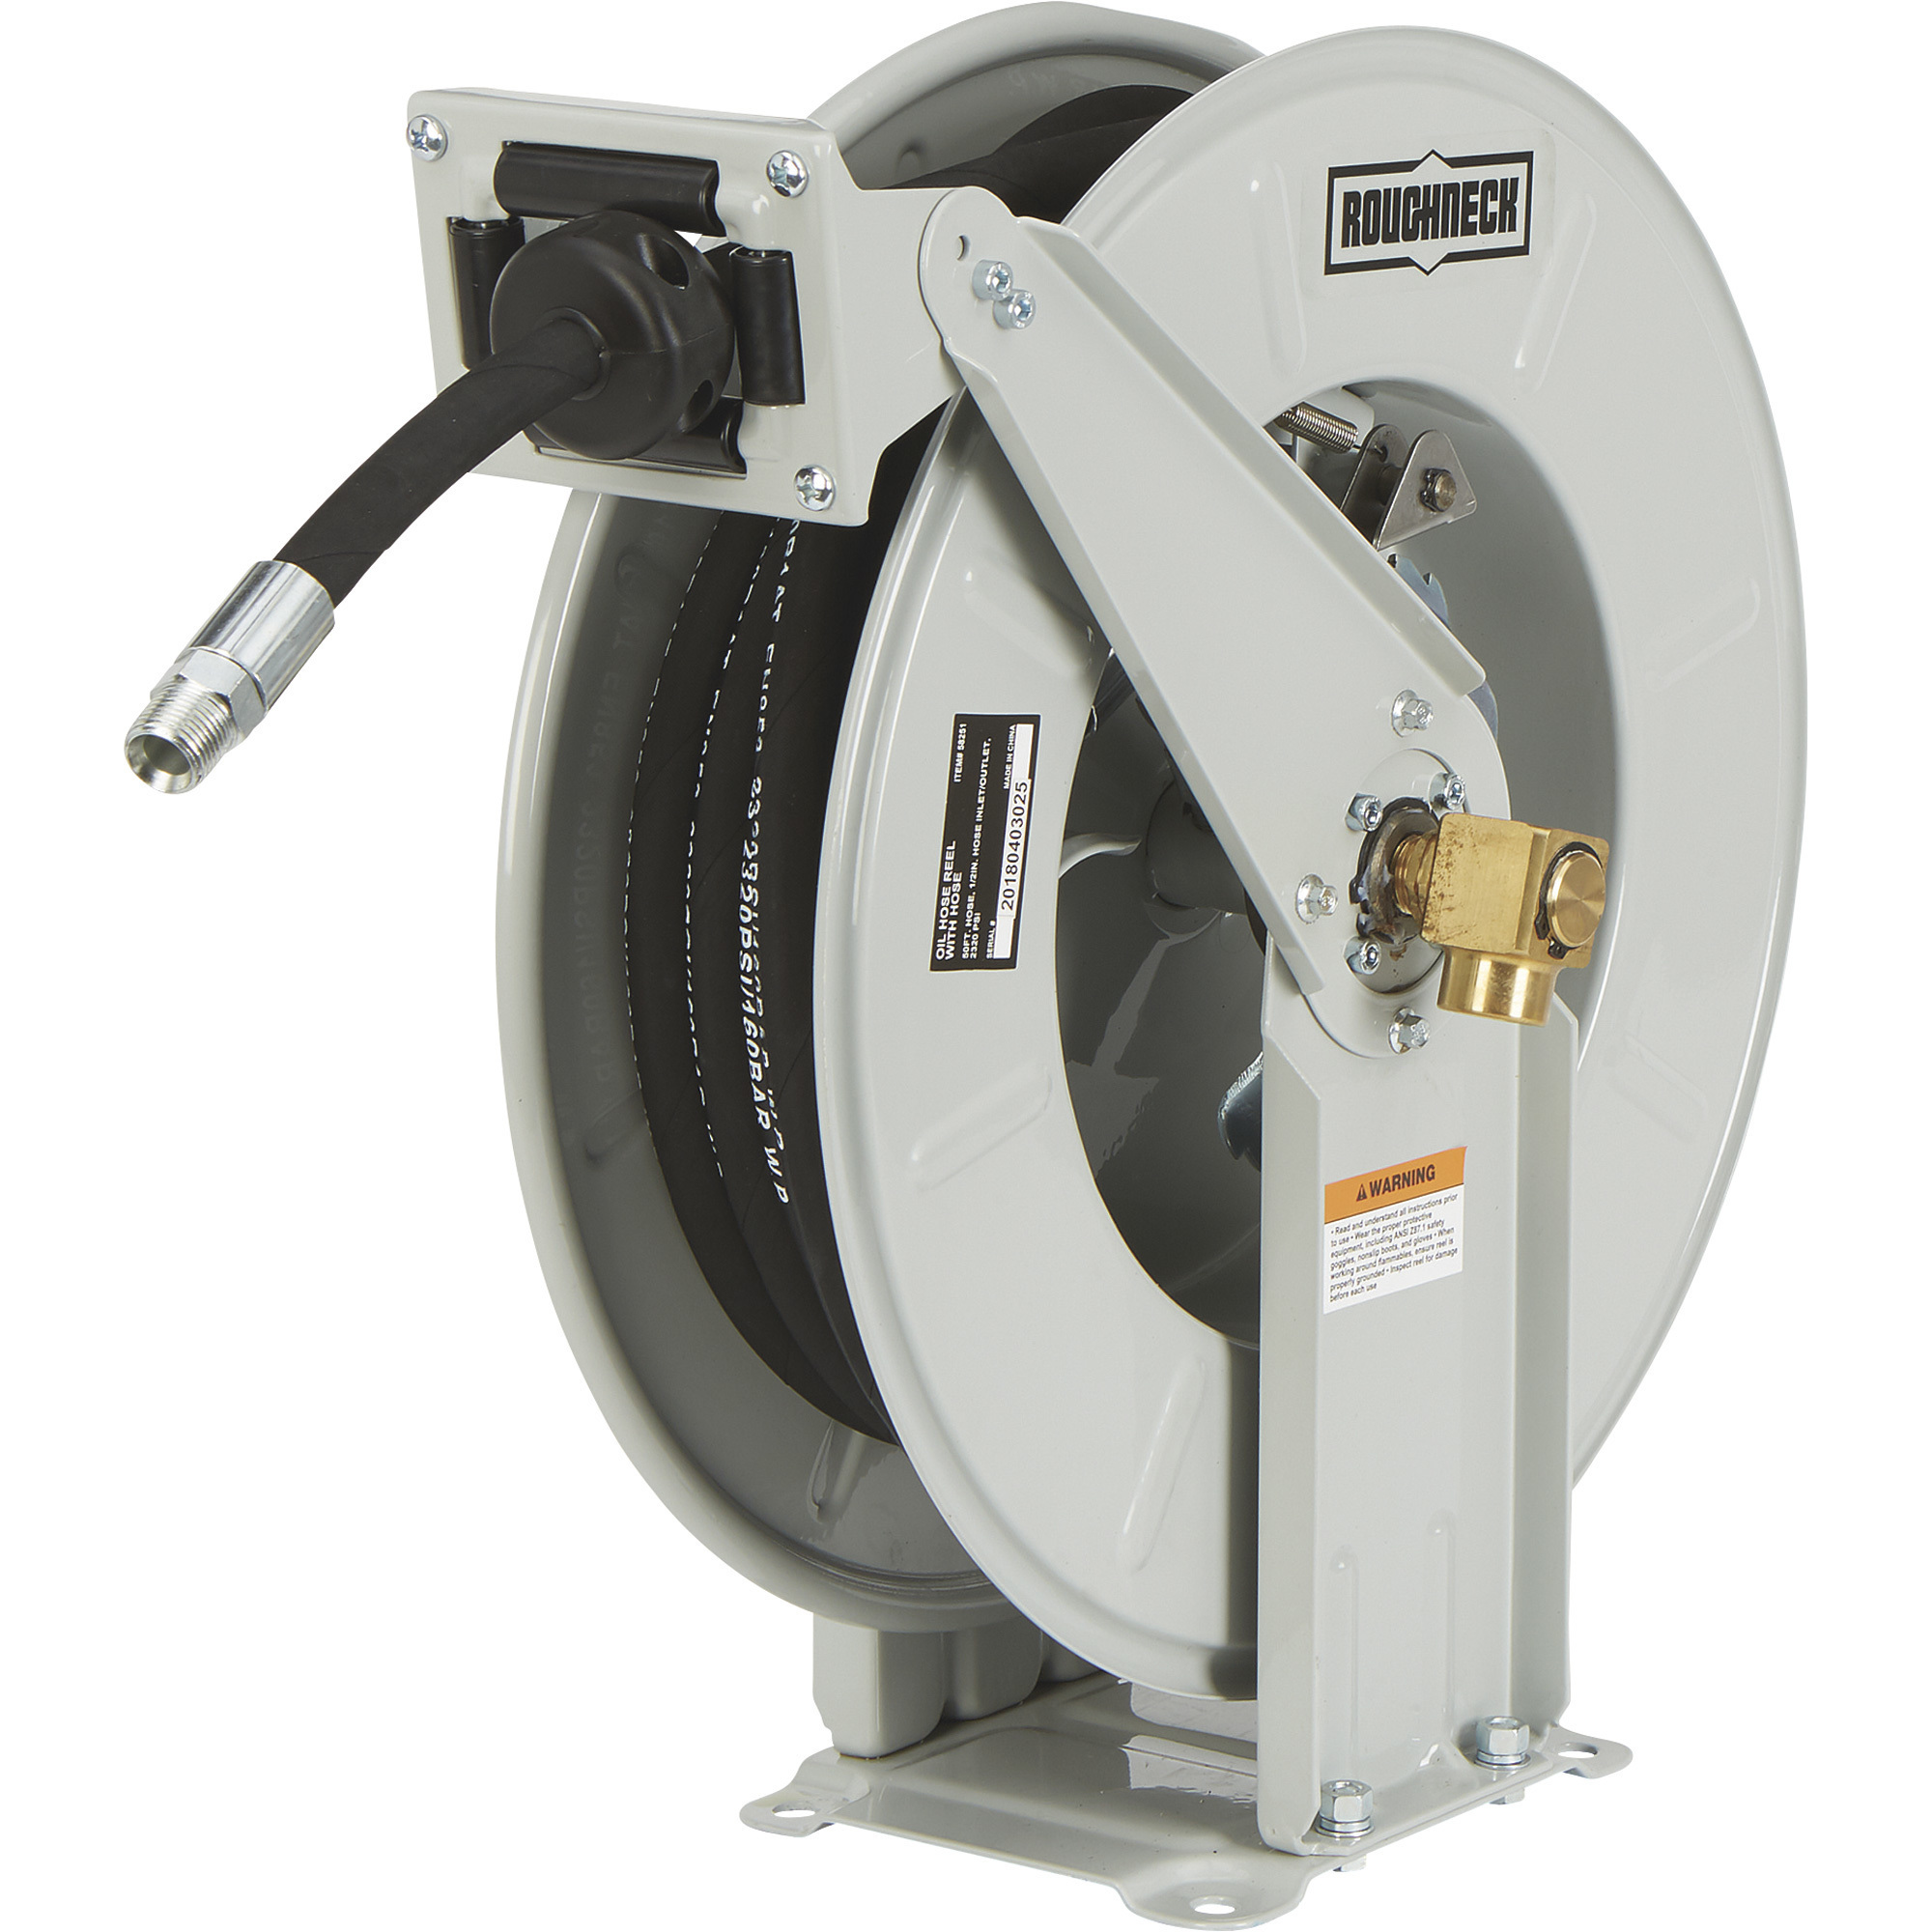 Roughneck Heavy-Duty Oil Hose Reel, With 1/2Inch x 50ft. Hose, 2320 PSI